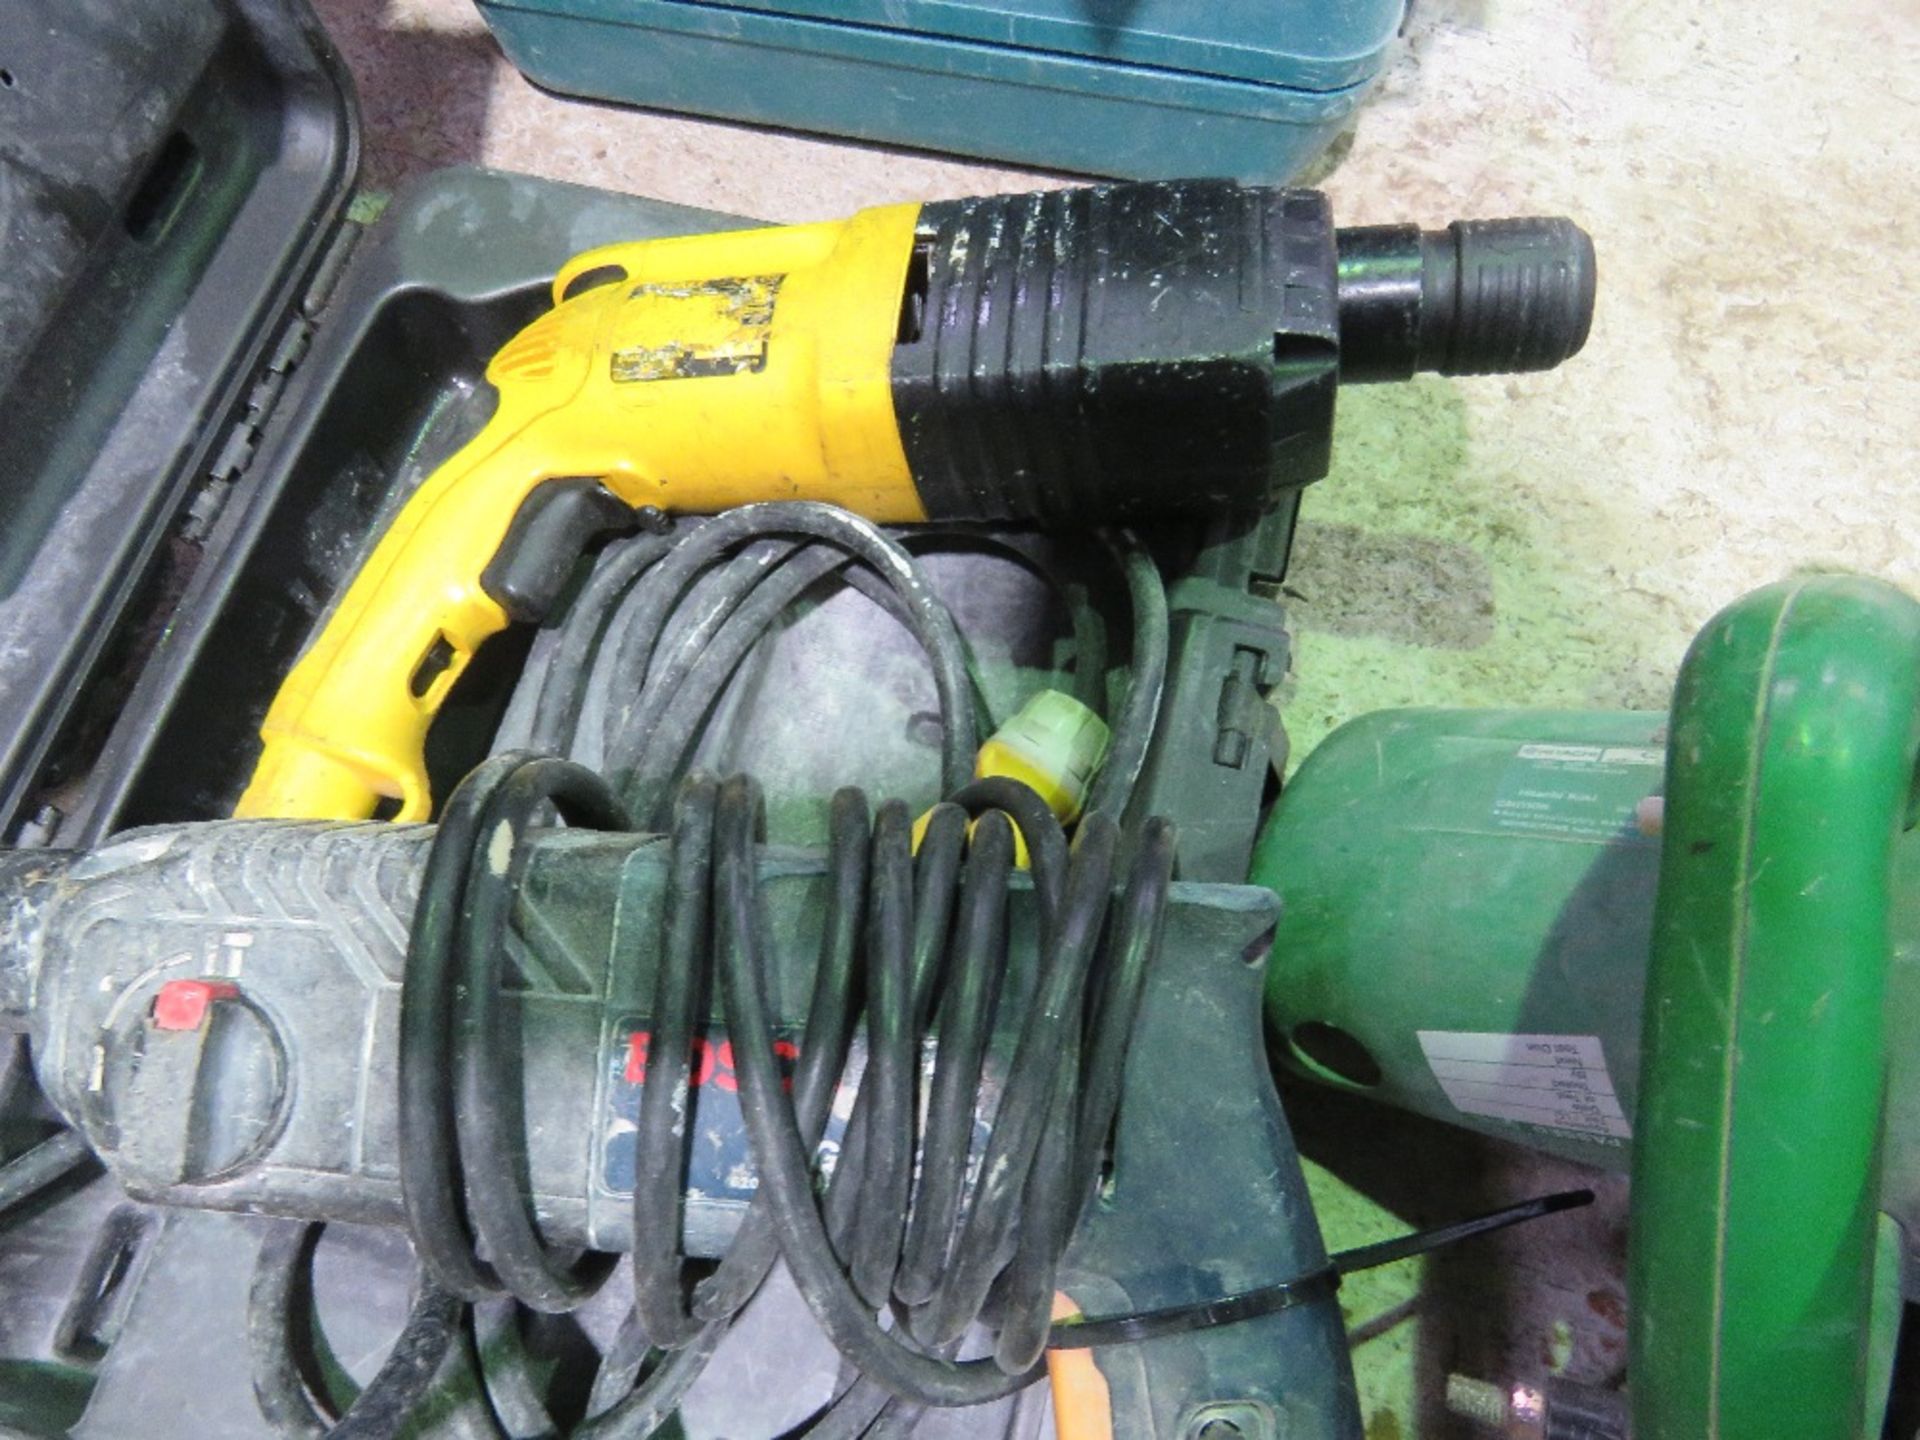 3 X POWER TOOLS: 2 X DRILLS PLUS A CIRCULAR SAW. DIRECT FROM LOCAL COMPANY. - Image 5 of 6